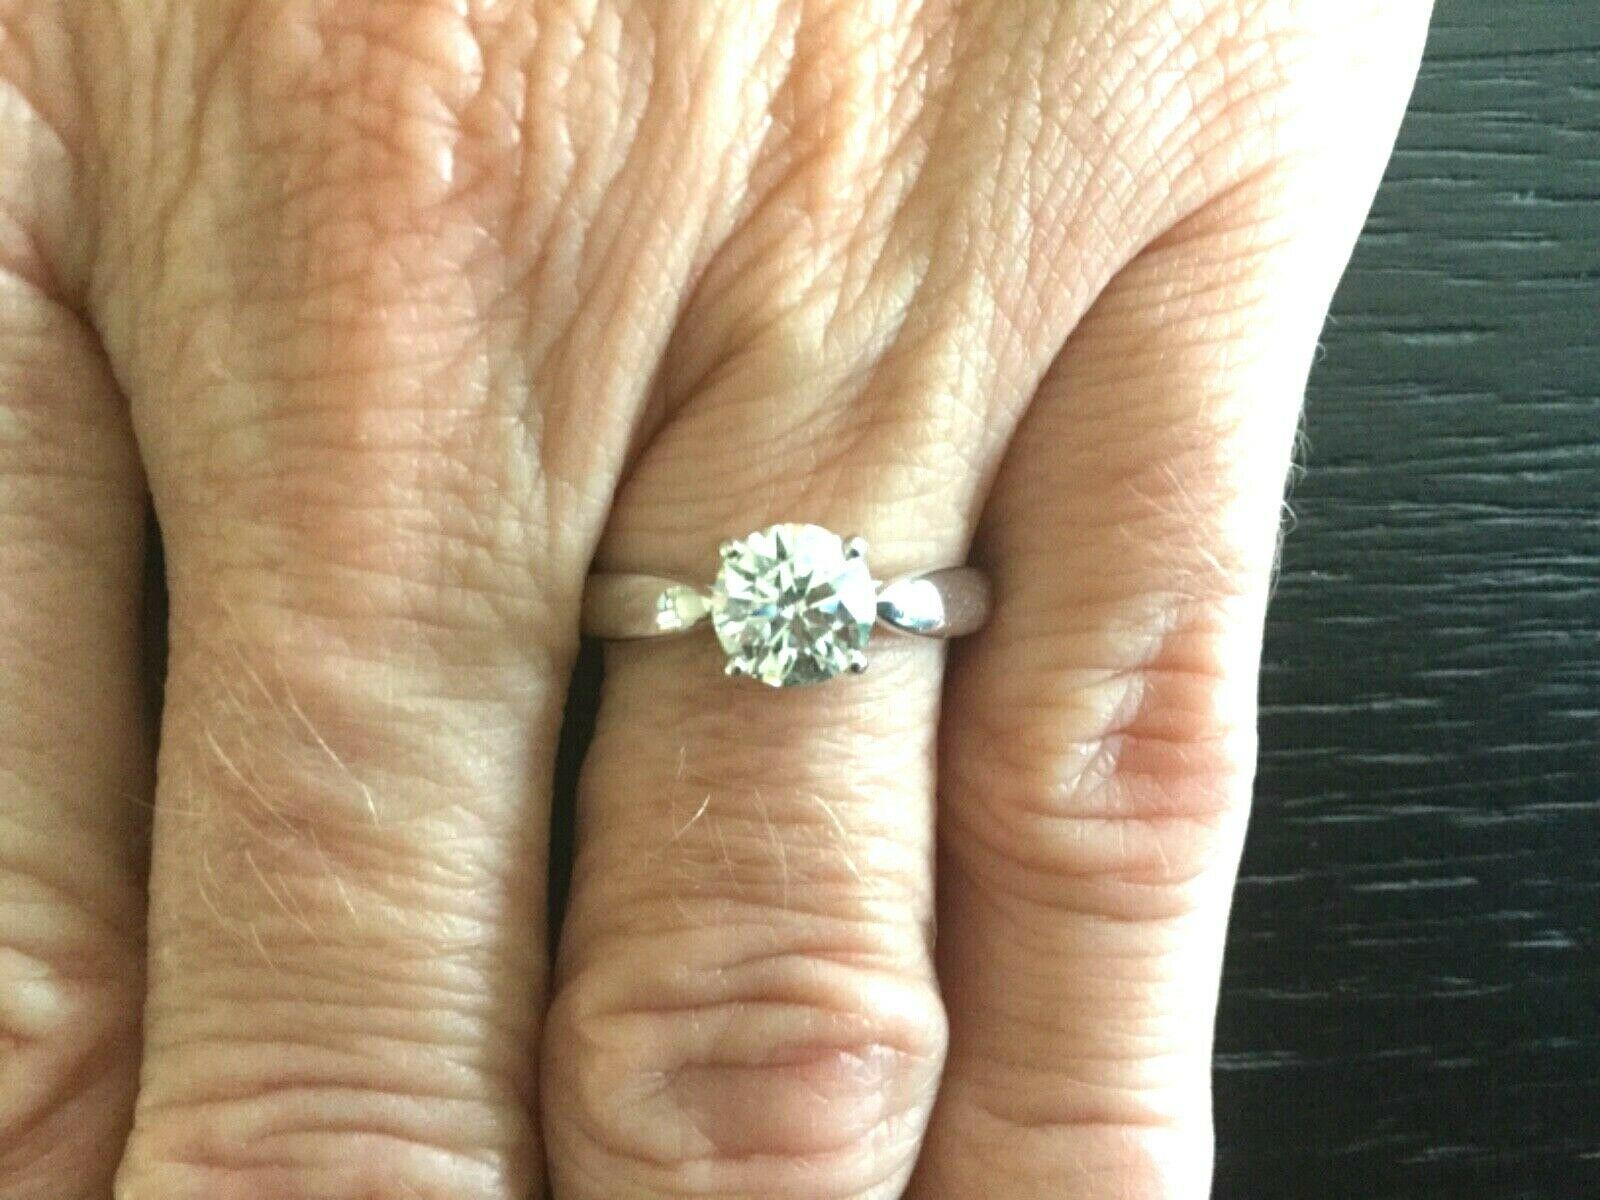 Being offered for your consideration is a like new Tiffany & Co Platinum and Diamond 1.06 carat natural round engagement ring set in the HIGHLY SOUGHT AFTER HARMONY setting.   Over 1 Carat Harmony Diamond Solitaires are EXTREMELY RARE and hard to